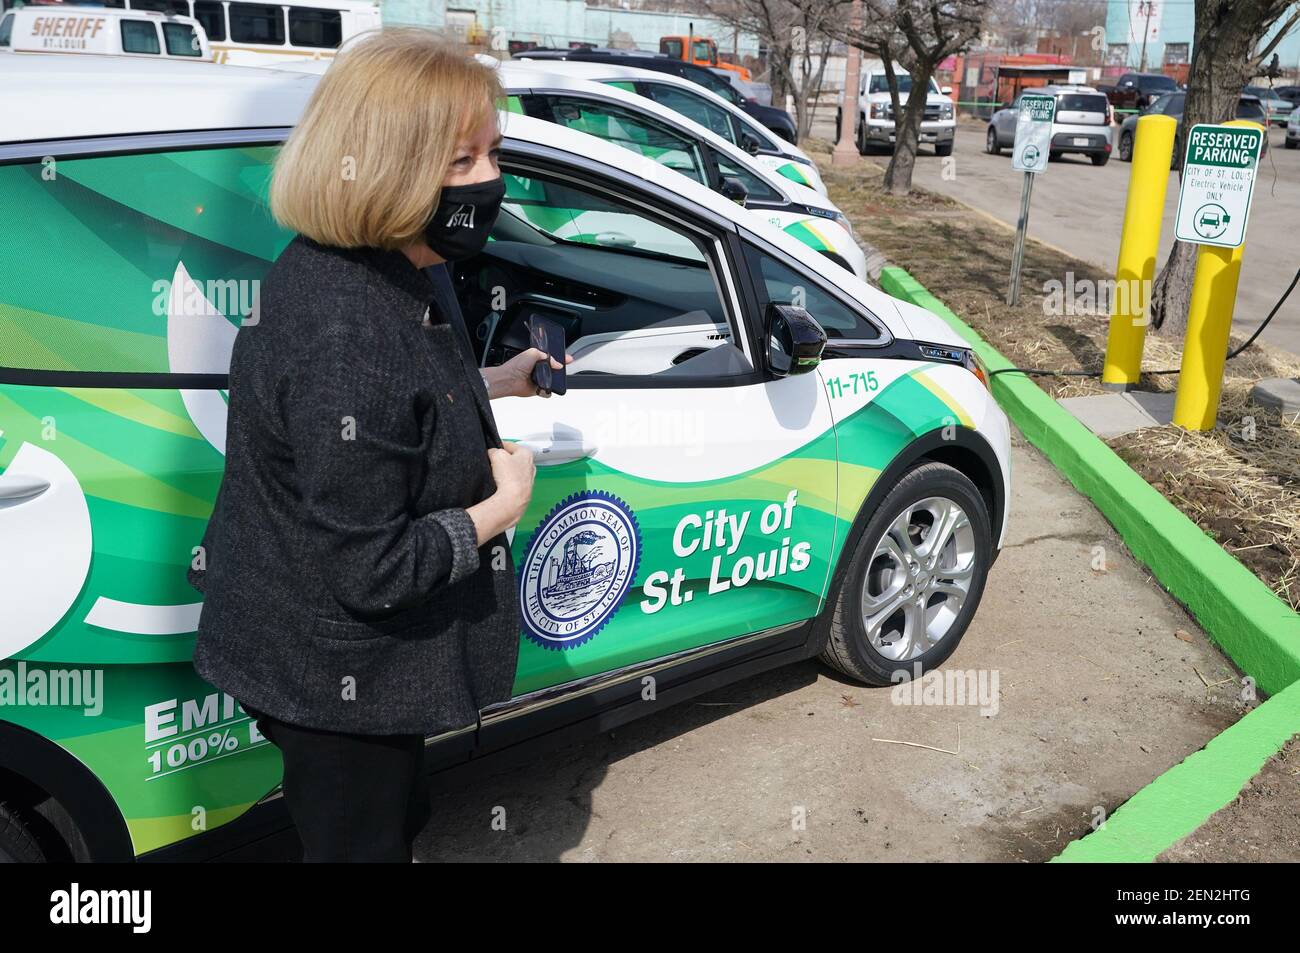 St. Louis, United States. 25th Feb, 2021. St. Louis Mayor Lyda Krewson exits one of the cities first electric vehicles, in St. Louis on Thursday, February 25, 2021. Krewson hopes the city will achieve carbon neutrality by 2050, by reducing greenhouse gas emissions. Clean Vehicle Policy will first only apply to light-duty vehicles. The terms will expand to cover medium and heavy-duty fleet vehicles as electric models become commercially available. Photo by Bill Greenblatt/UPI Credit: UPI/Alamy Live News Stock Photo